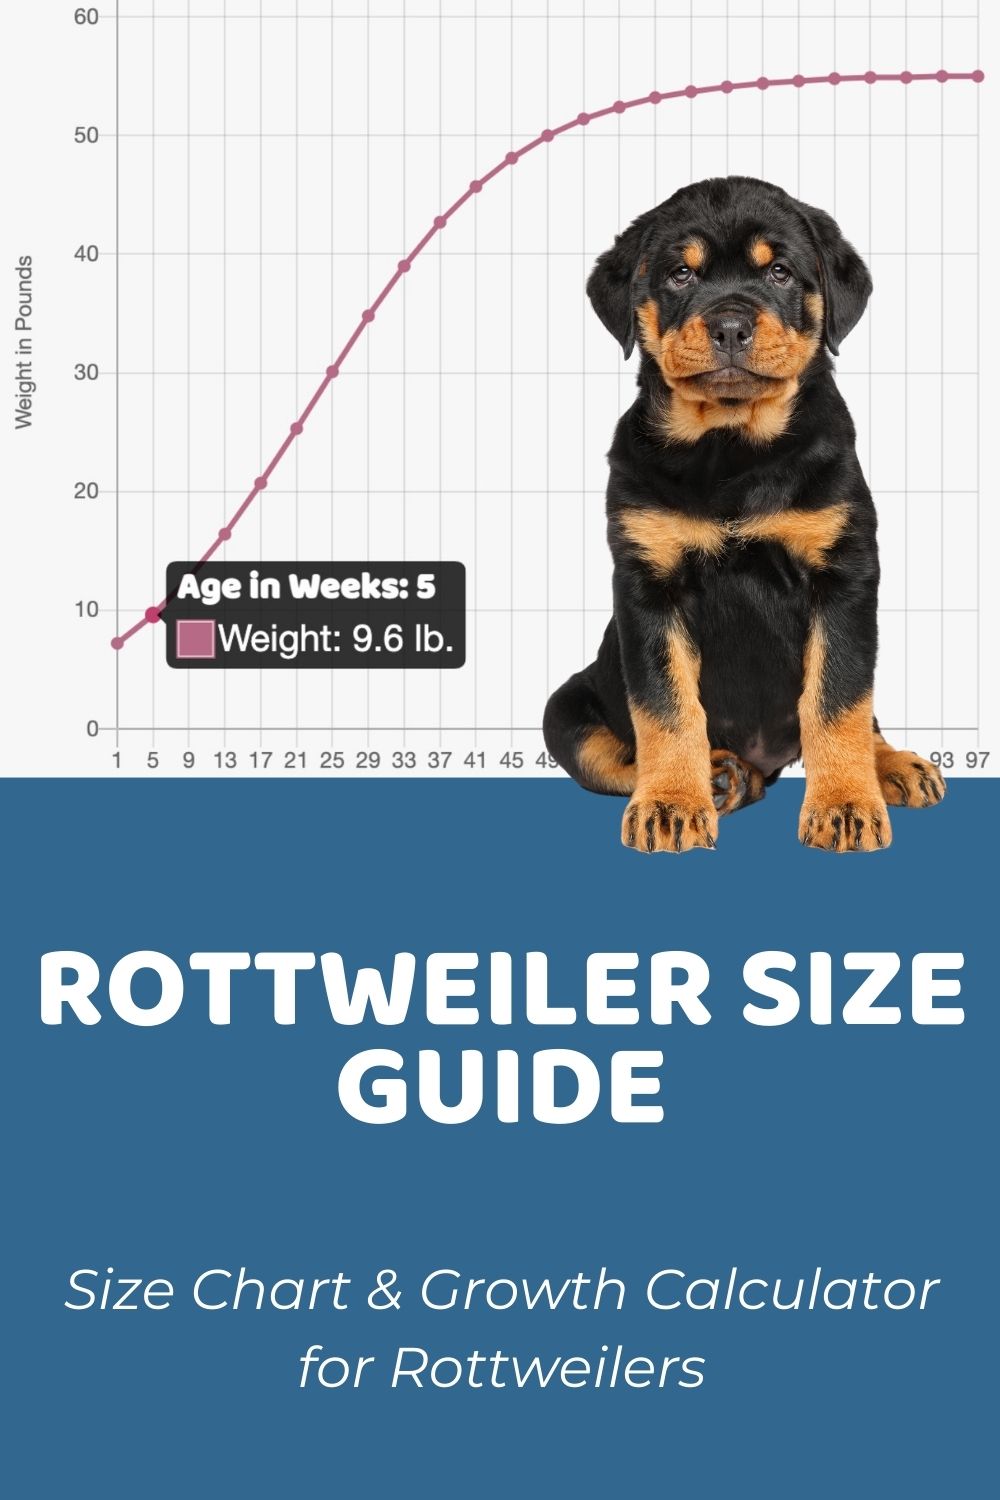 Rottweiler Size Guide How Big Do Rottweilers Get? Puppy Weight